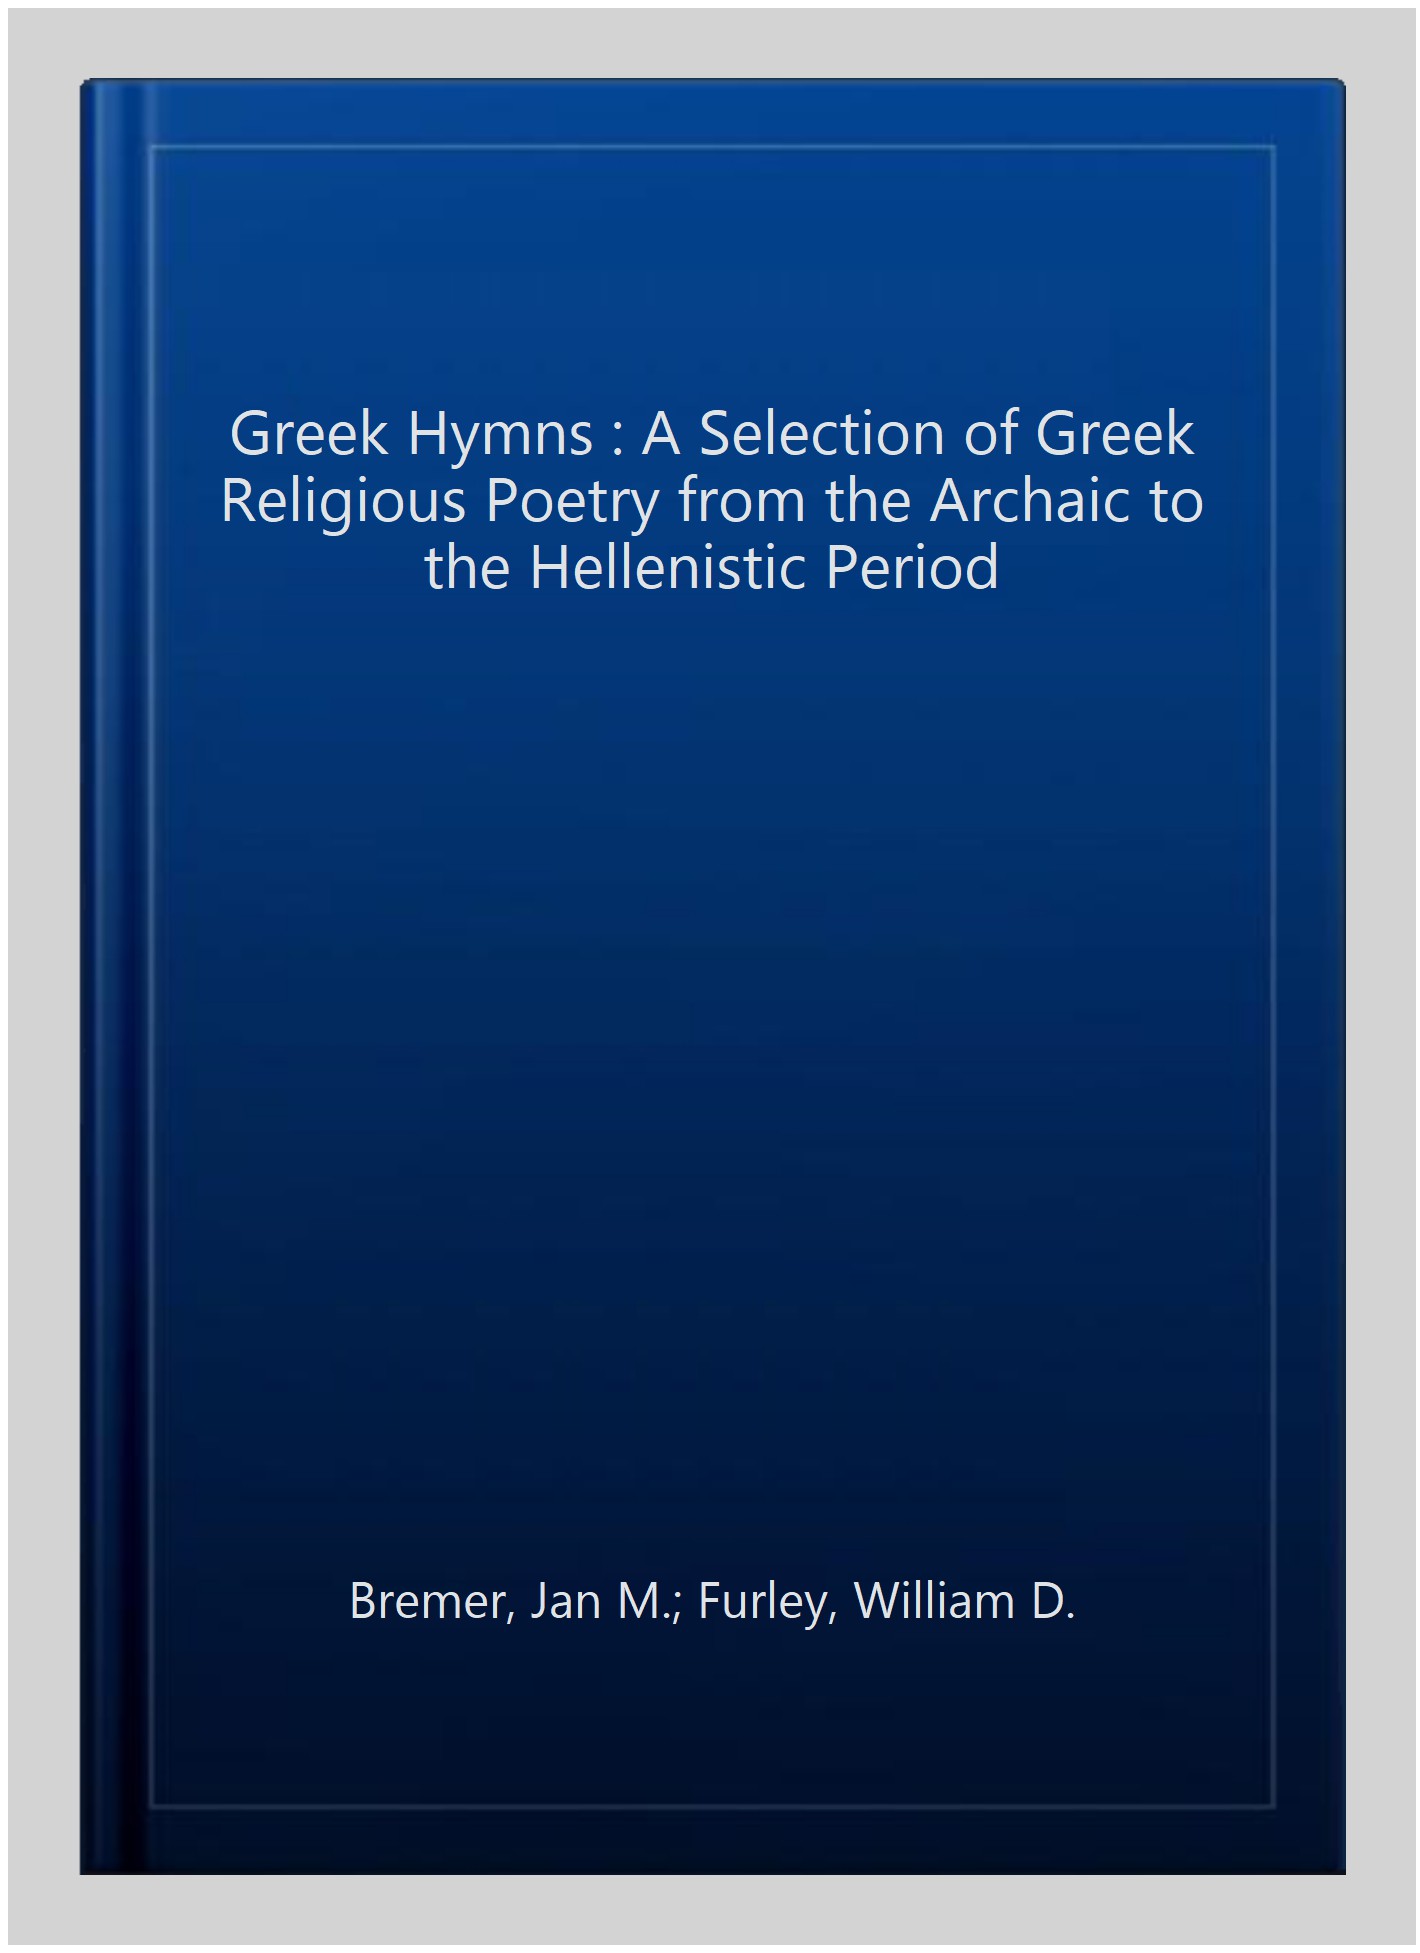 Greek Hymns : A Selection of Greek Religious Poetry from the Archaic to the Hellenistic Period - Bremer, Jan M.; Furley, William D.